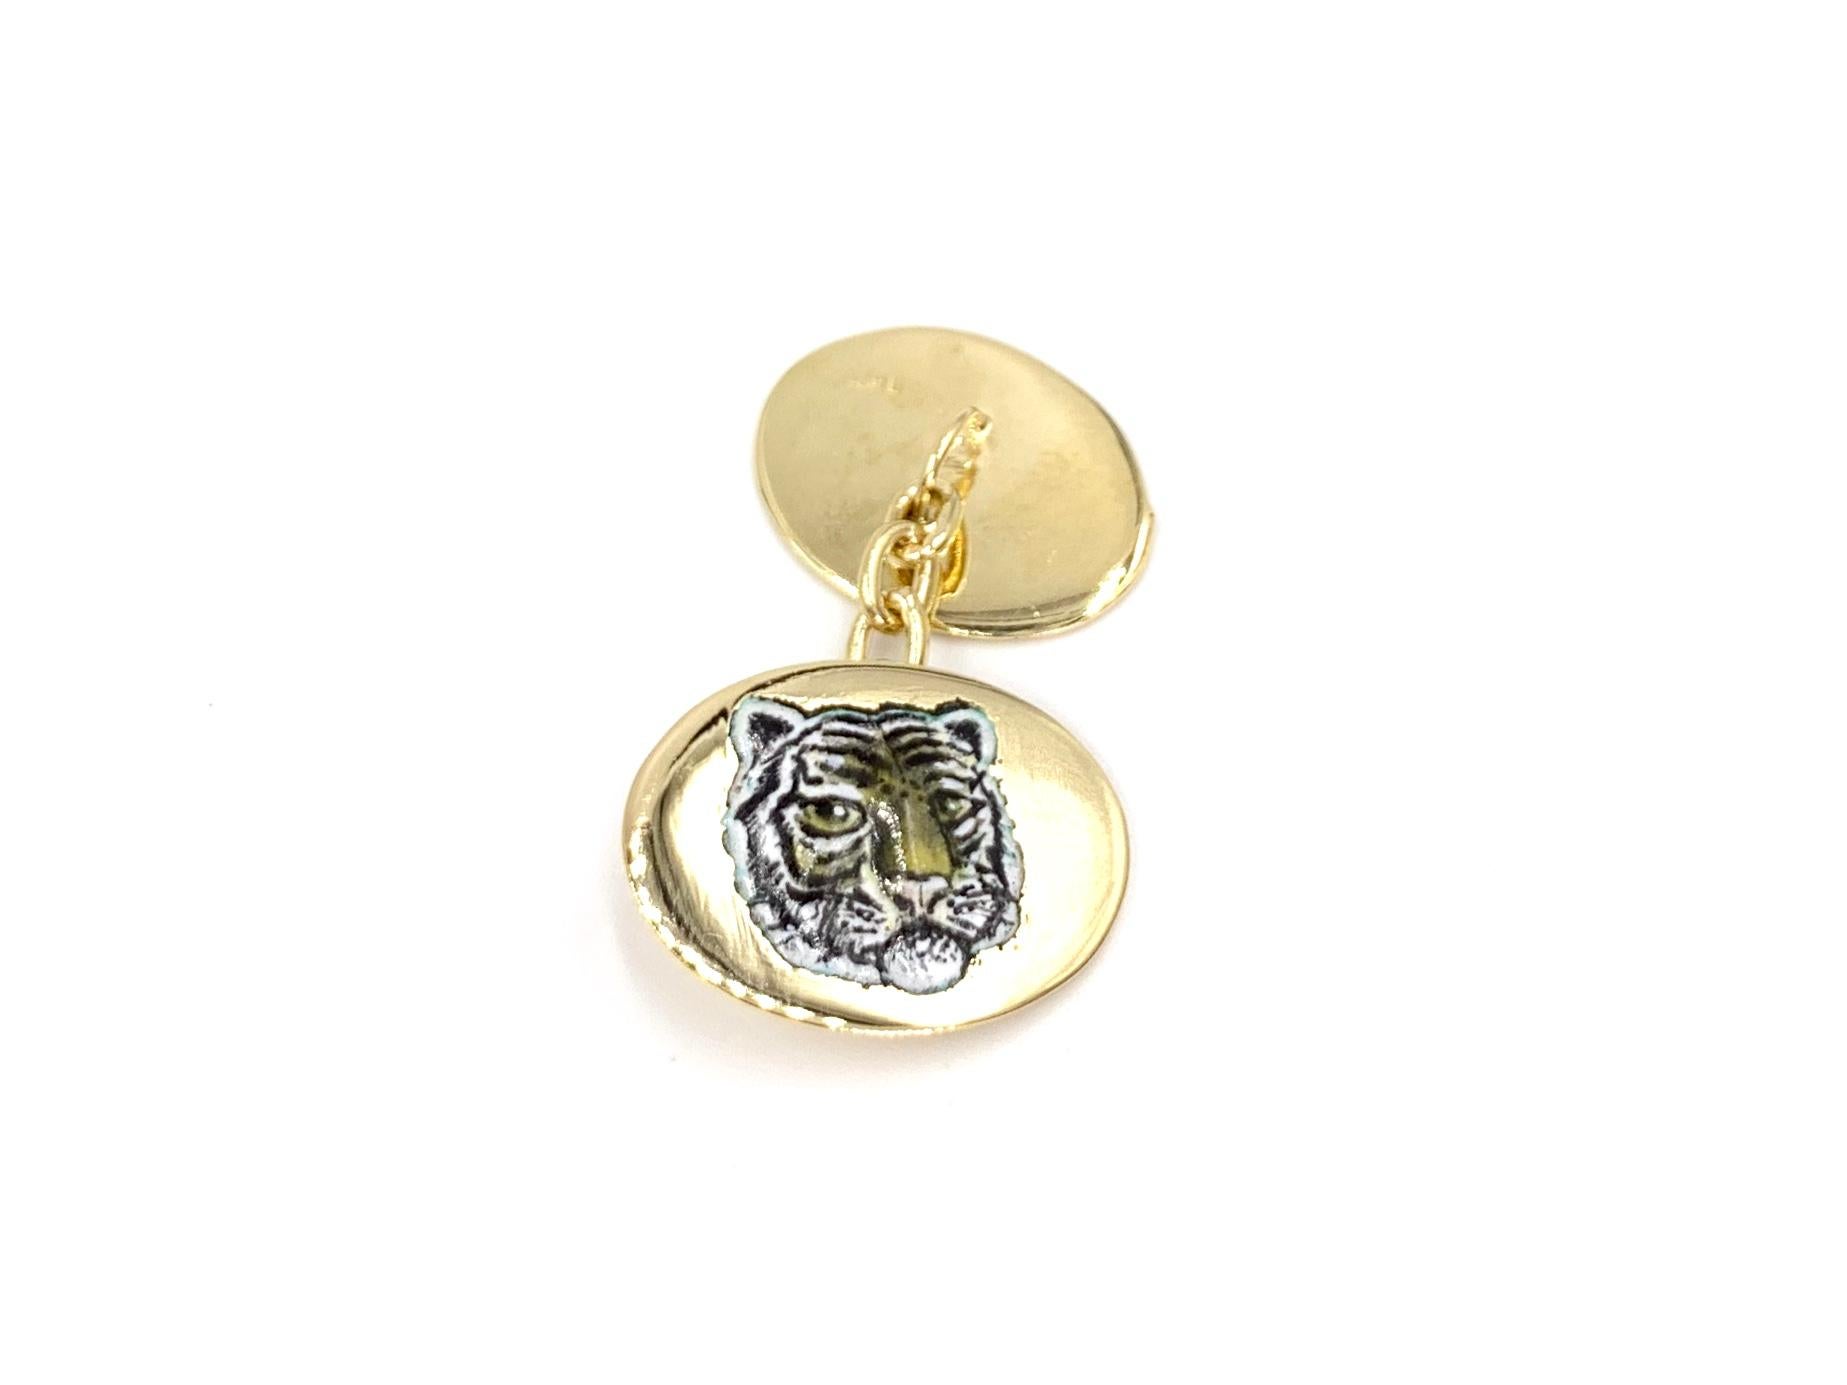 Vintage style polished 18 karat yellow gold oval cuff links featuring a detailed enamel tiger's head on the front. Signed 18k LT
Front facing cuff link measures 19mm x 14mm
Inside facing link measures 18mm x 13mm
Weight of each cuff link is 6.8 grams